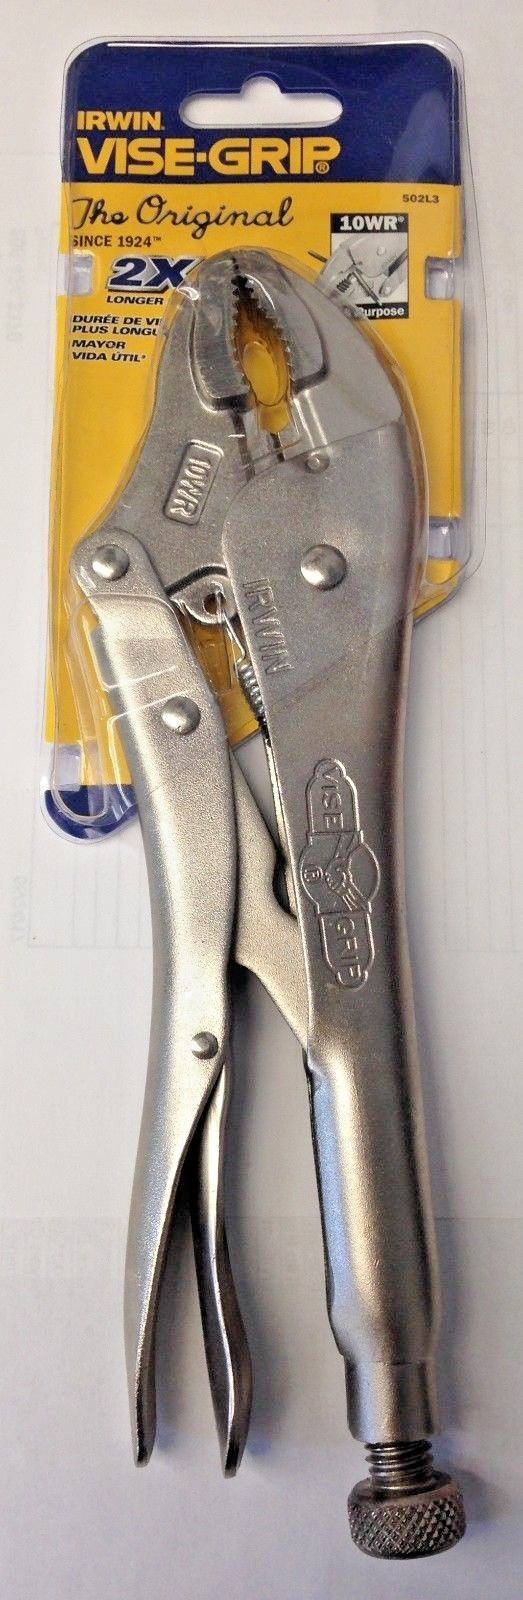 Irwin Vise-Grip 10WR 10" Curved Jaw Locking Pliers With Wire Cutter 502L3